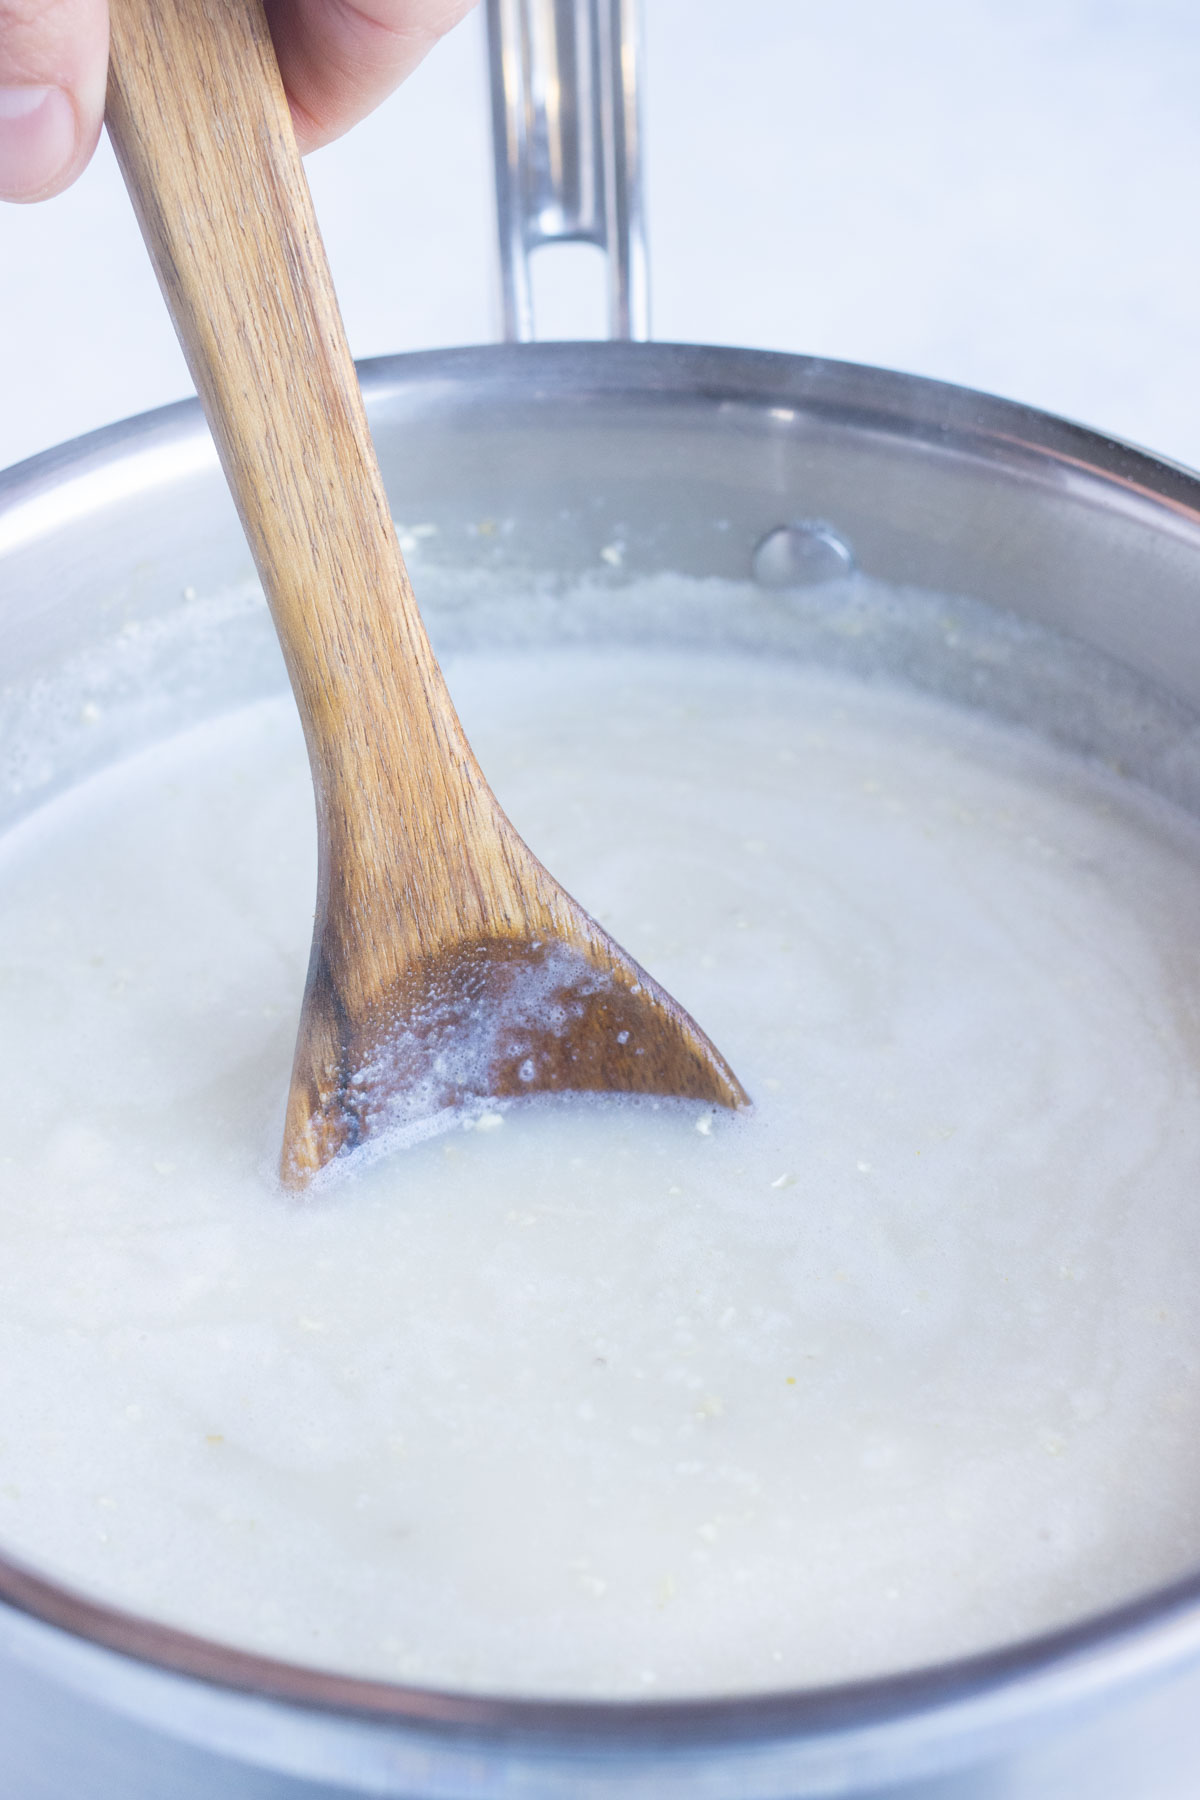 Broth and milk are boiled on the stove.